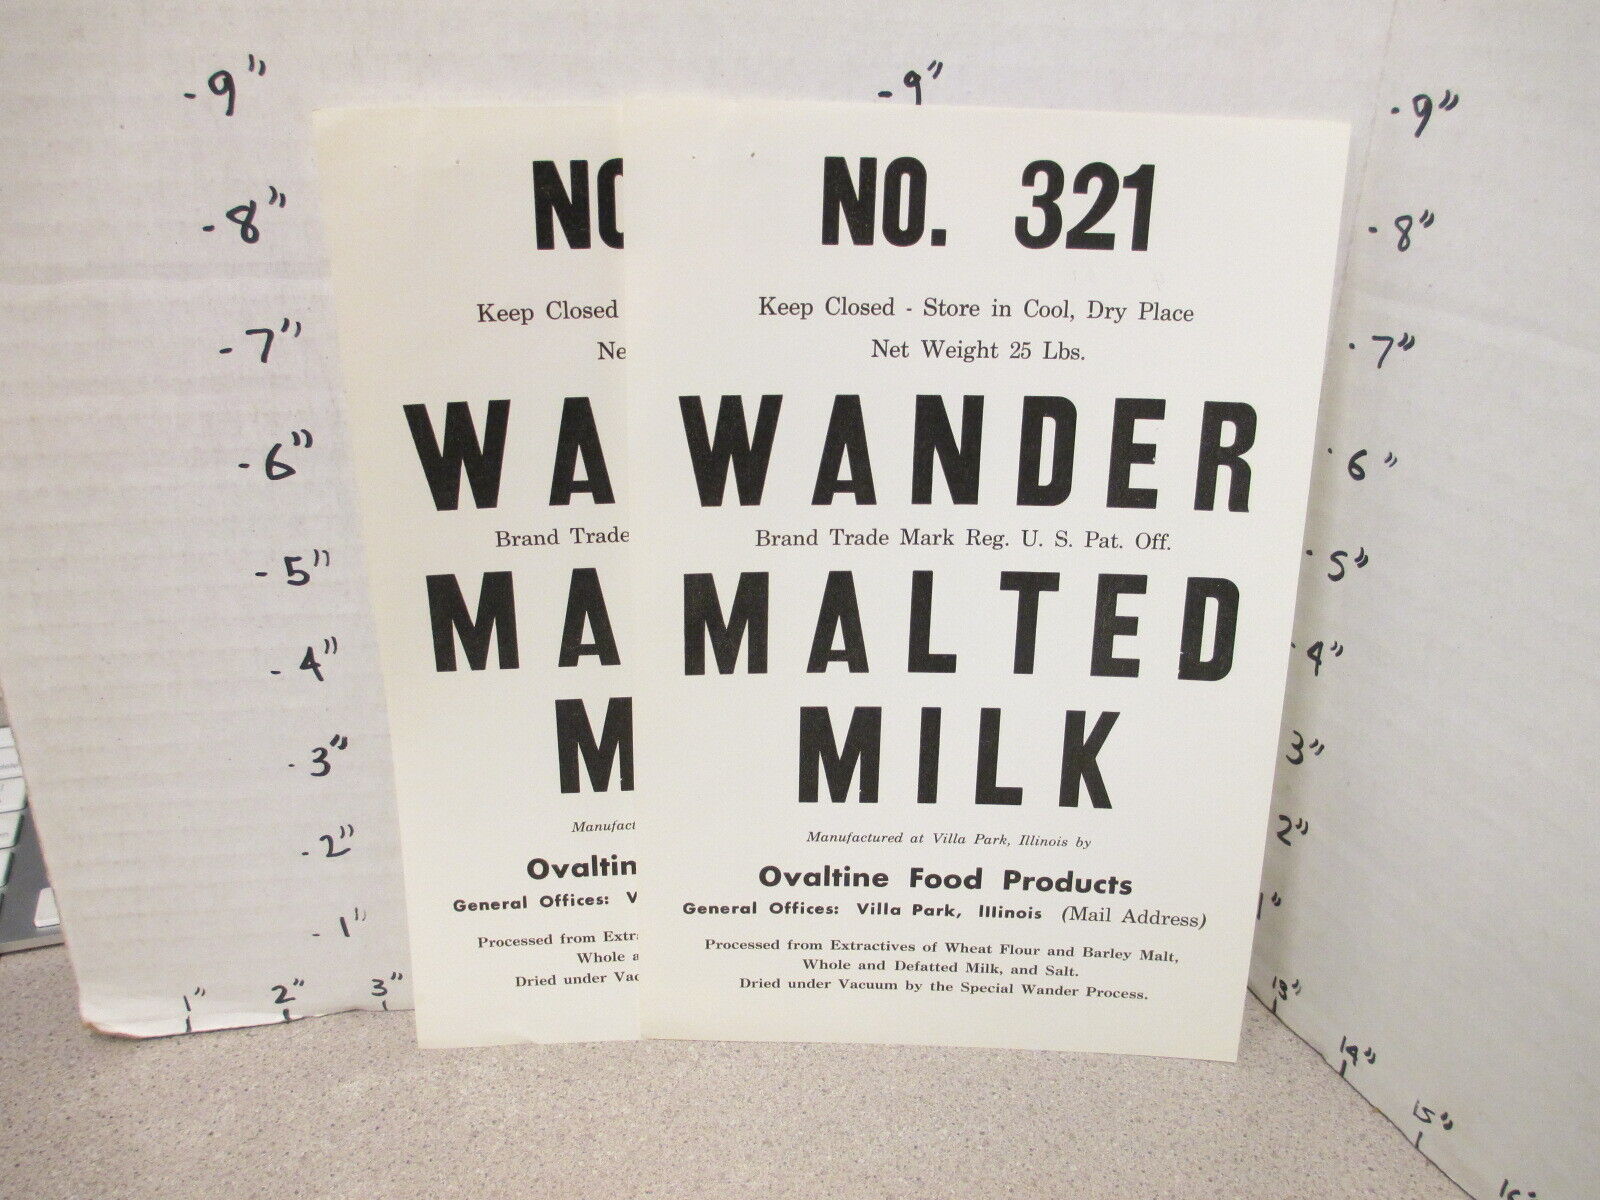 Ovaltine Co 1950s ? Wander malted milk product package labels (2) 25lbs #321